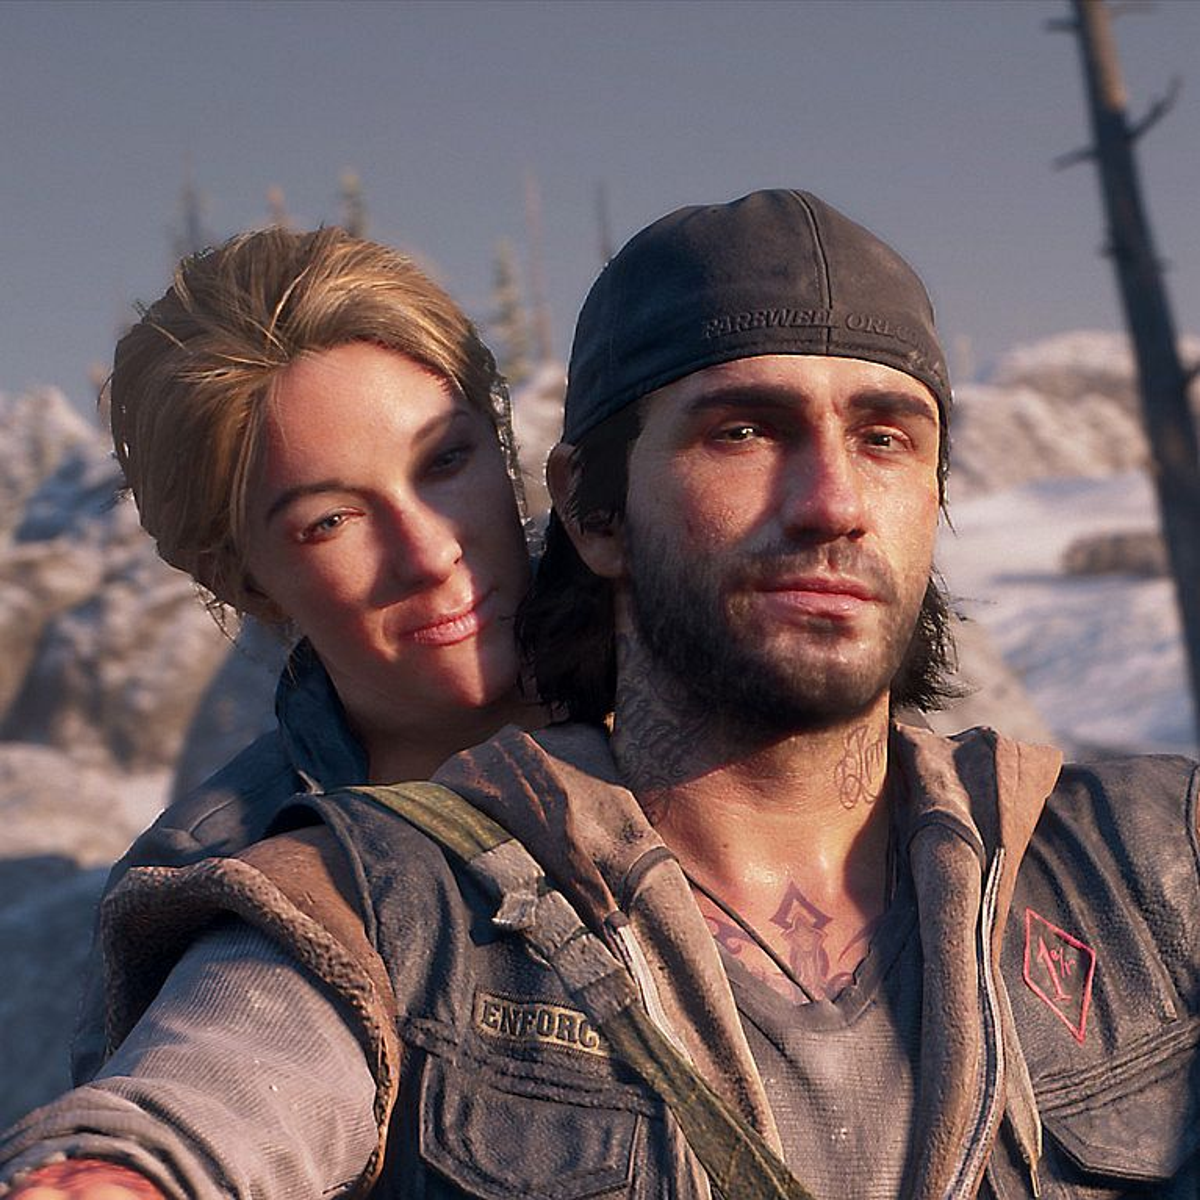 Days Gone release NEWS: Review round-up, best prices, Metacritic score, day  one update, Gaming, Entertainment